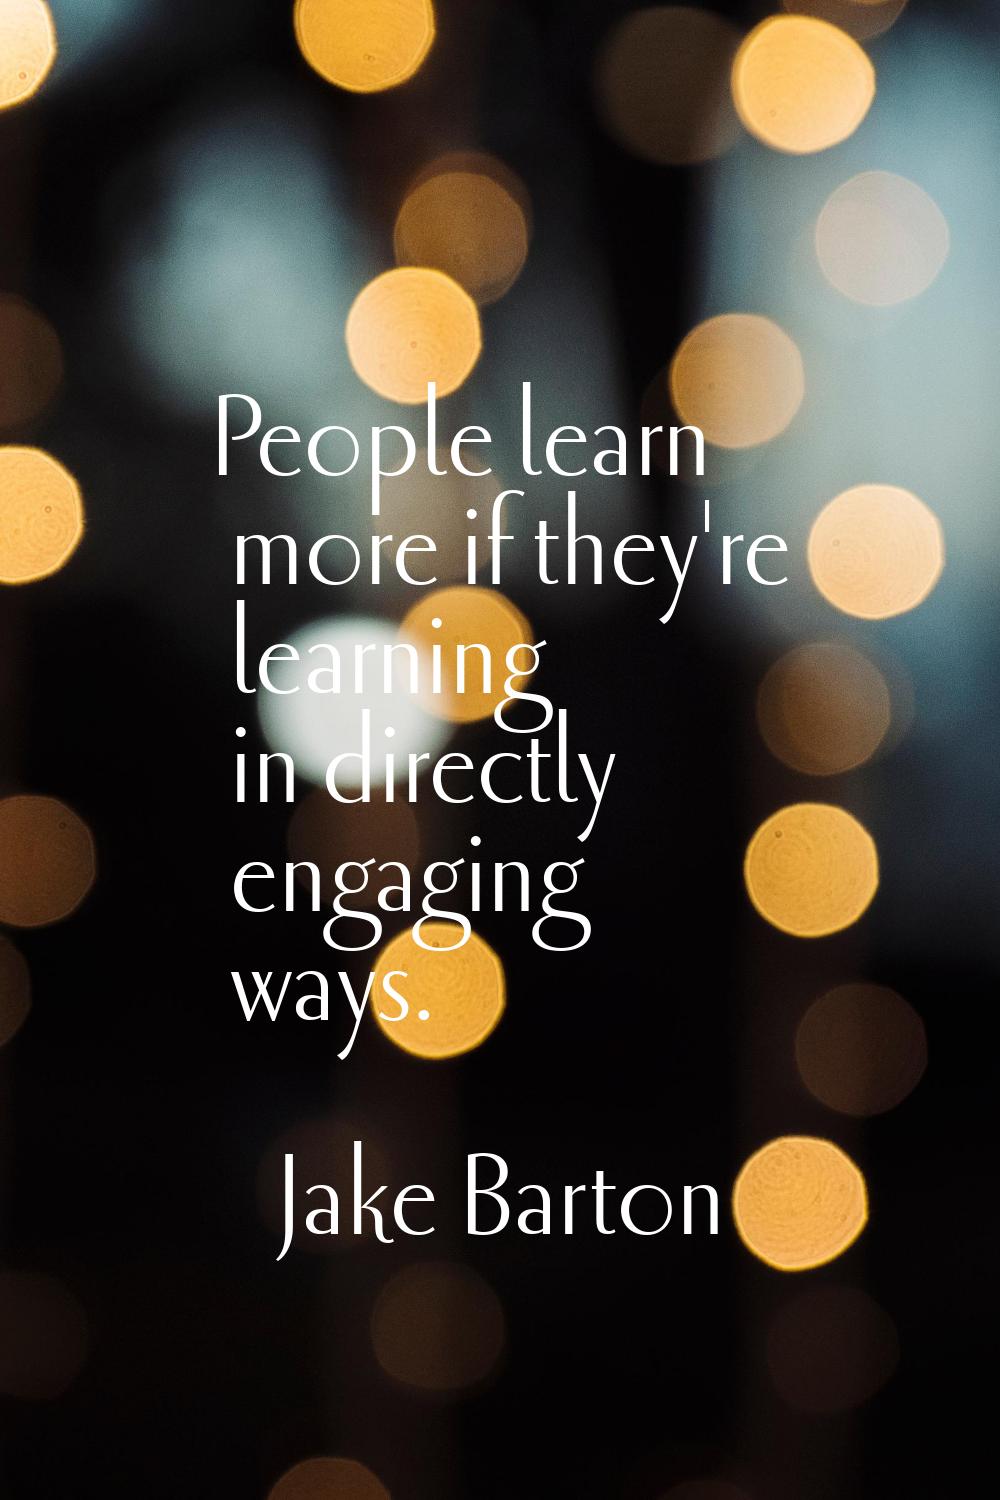 People learn more if they're learning in directly engaging ways.